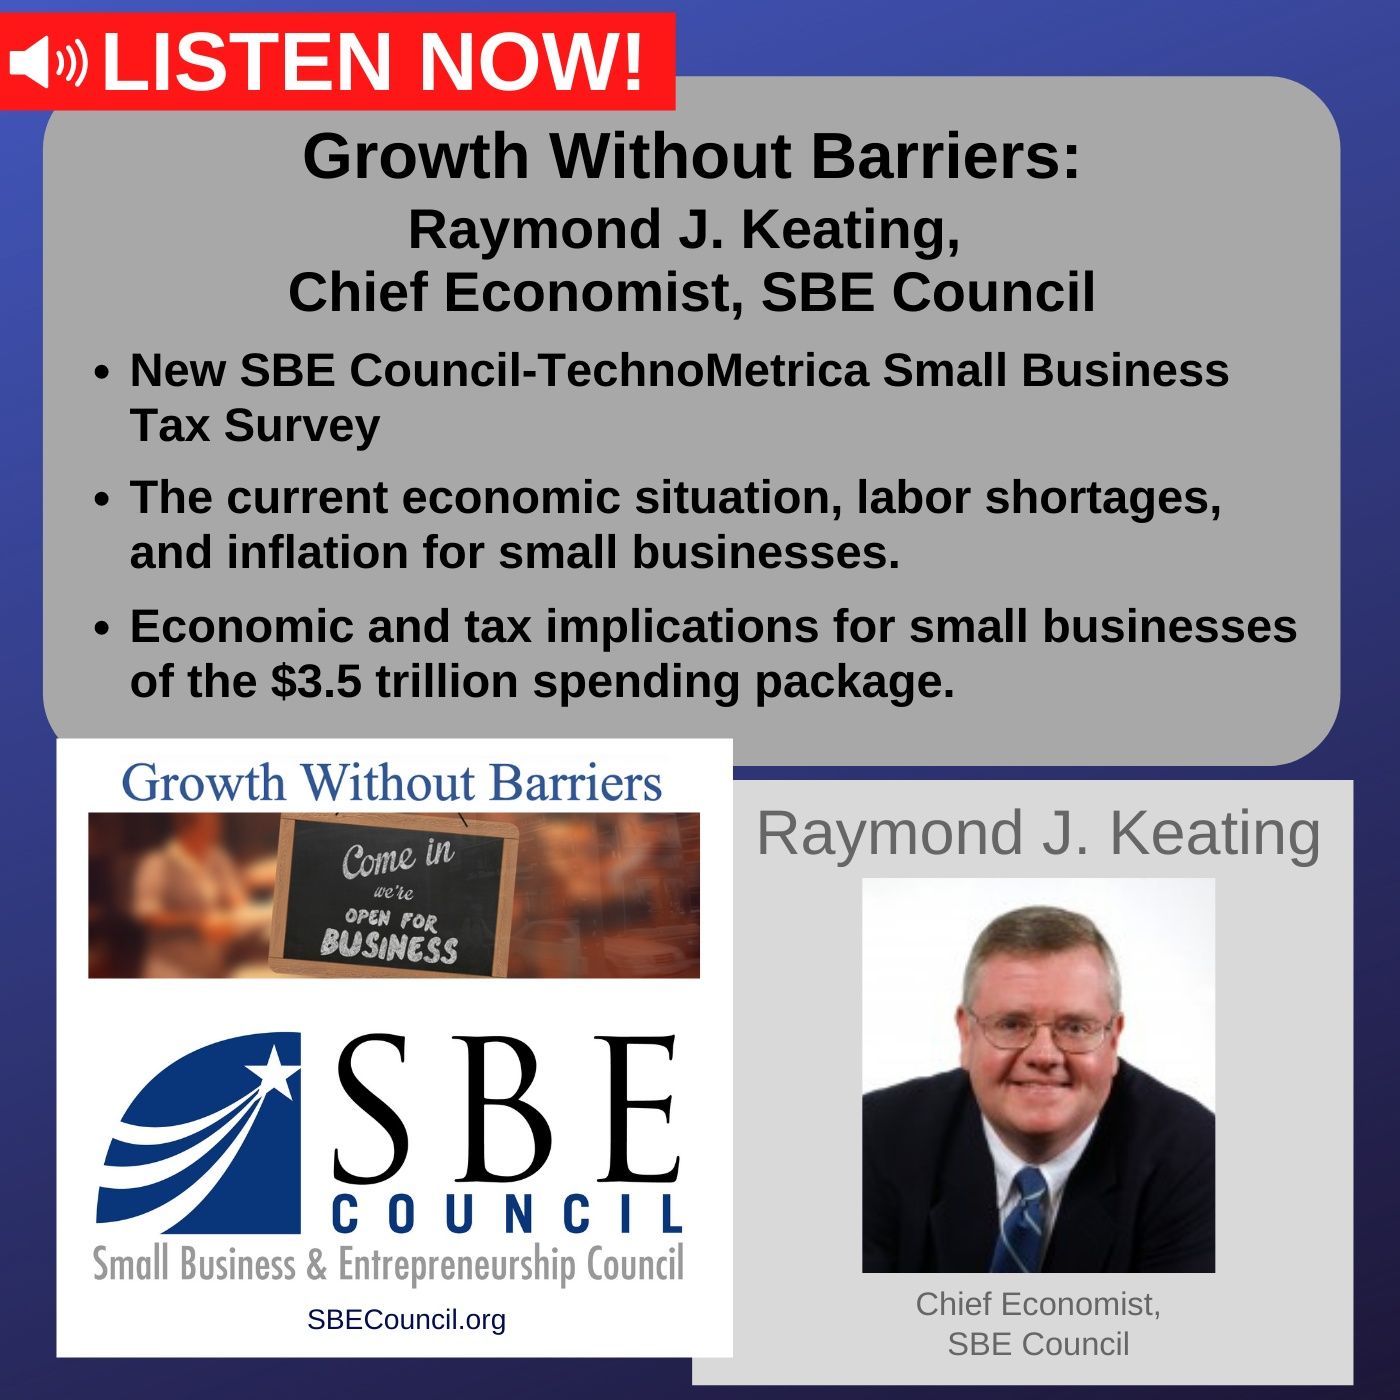 Raymond J. Keating, chief economist, SBE Council: New SBE Council tax survey; implications for small biz of $3.5 trillion spending package.